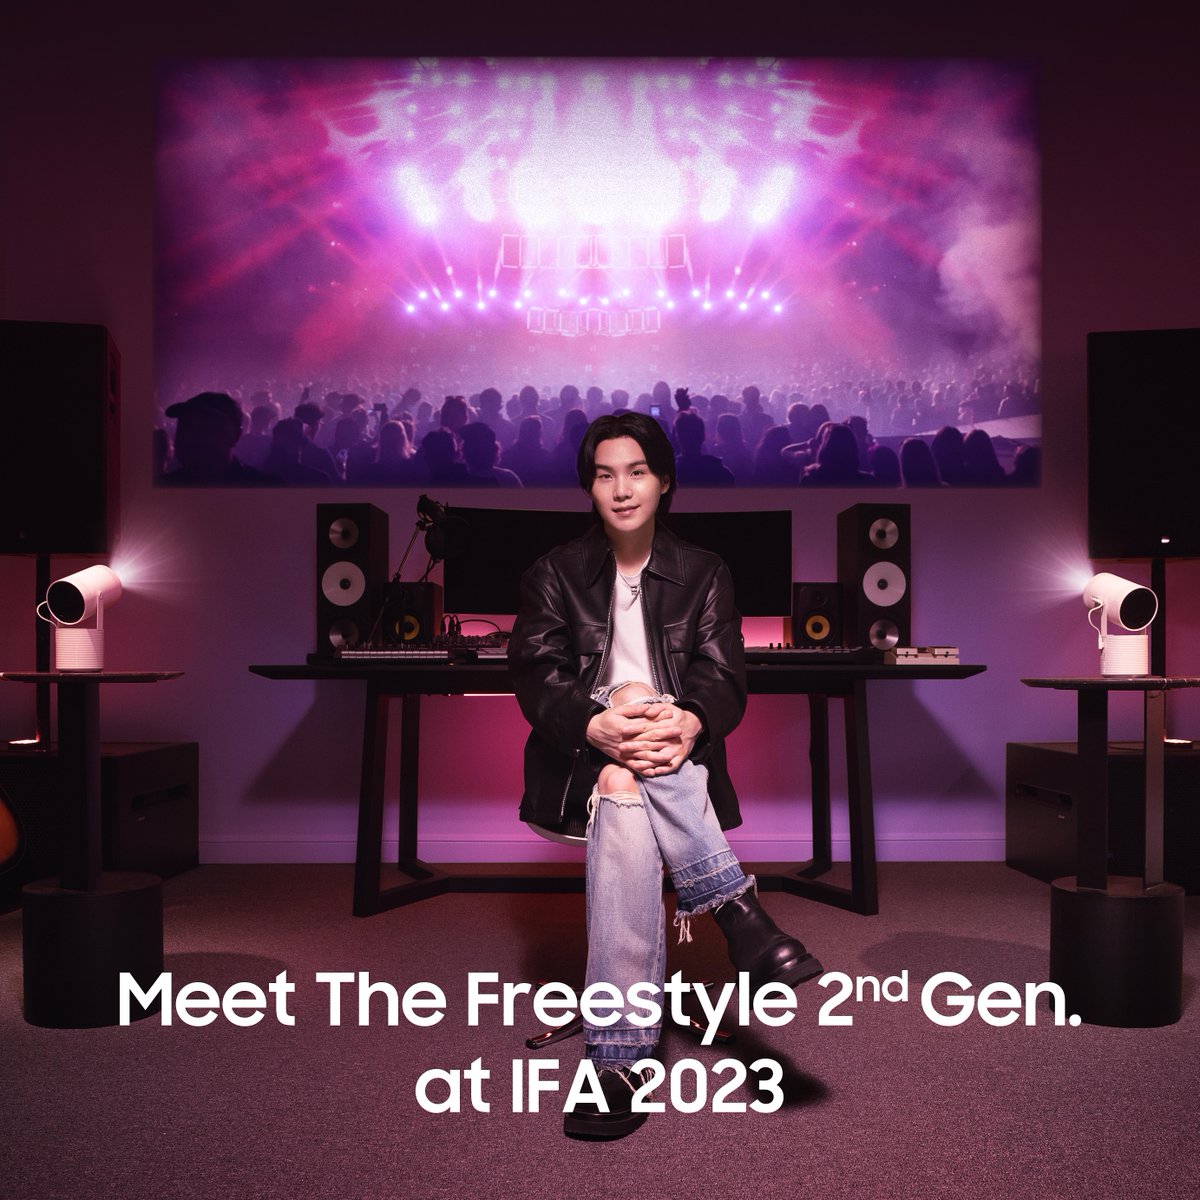 The Freestyle just got a makeover. ✨ We teamed up with SUGA of BTS to introduce #TheFreestyle 2nd Gen. at IFA 2023. Experience The Freestyle in a totally different way. Learn more at samsung.com

 #LifestyleTV #LifestyleScreen #SUGAofBTS #SUGA #IFA2023 #Samsung